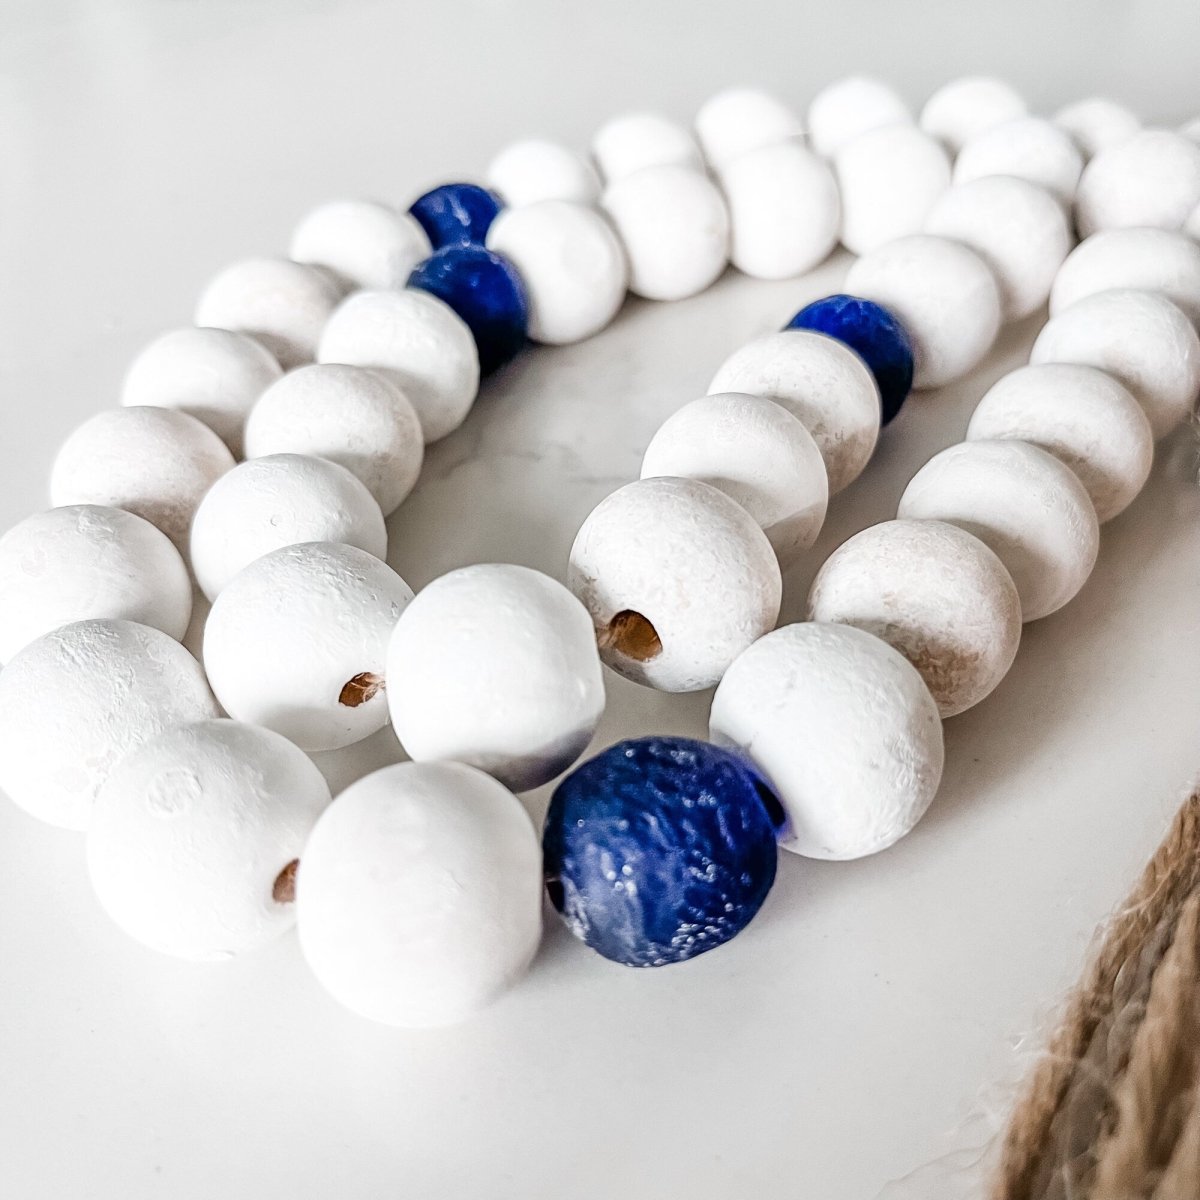 Whitewashed Wood Bead Garland with Jumbo Cobalt Blue Recycled Glass Beads - sonder and wolf